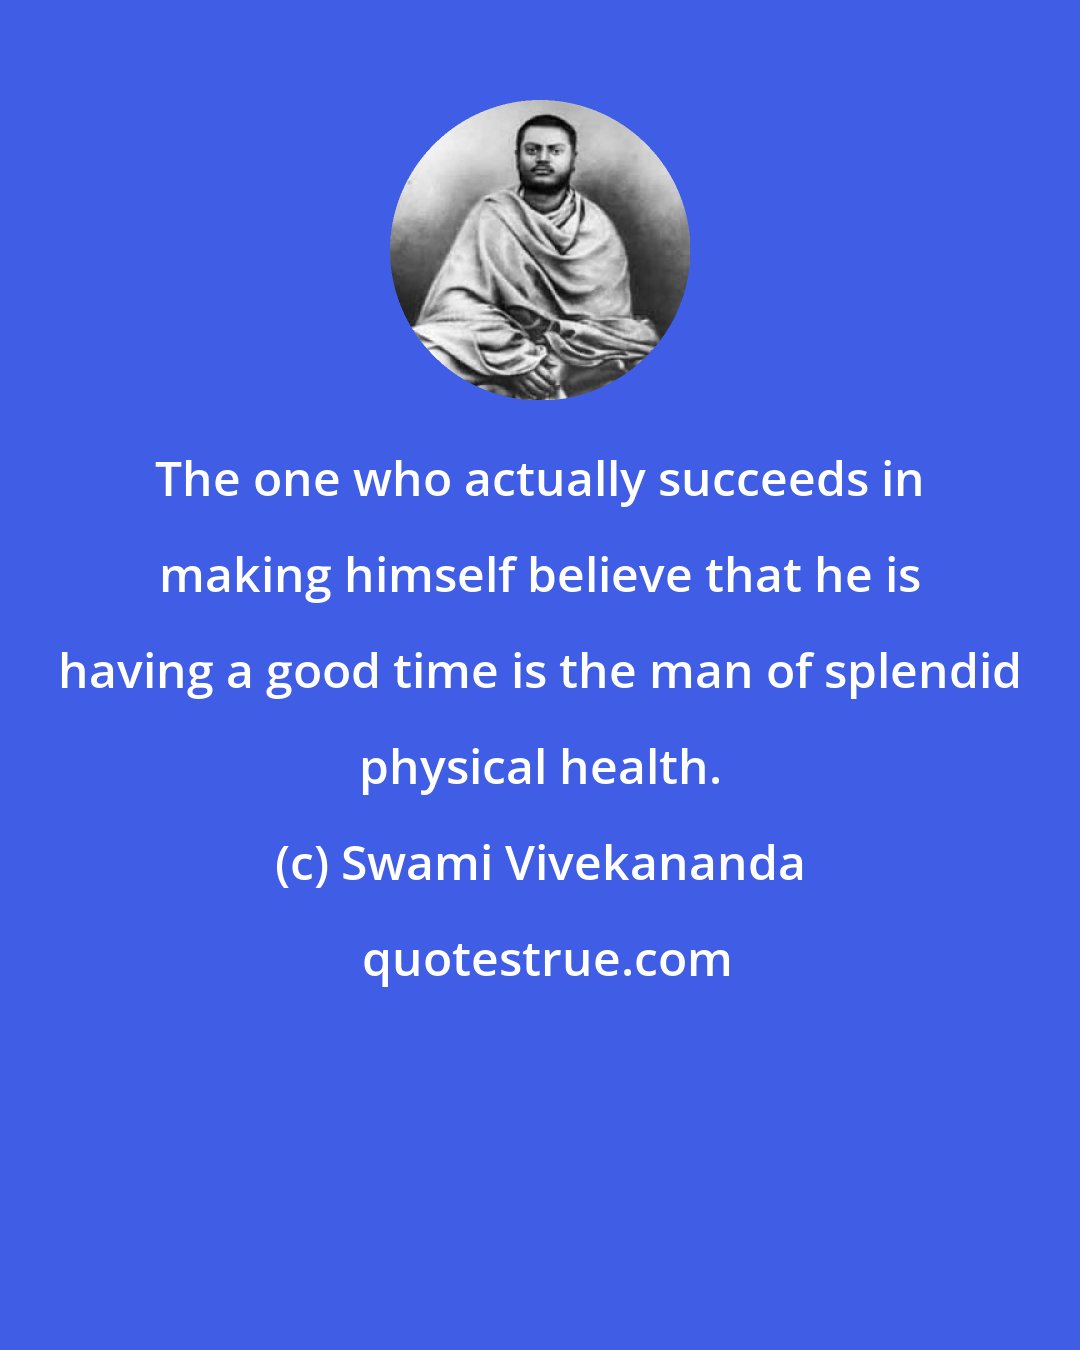 Swami Vivekananda: The one who actually succeeds in making himself believe that he is having a good time is the man of splendid physical health.